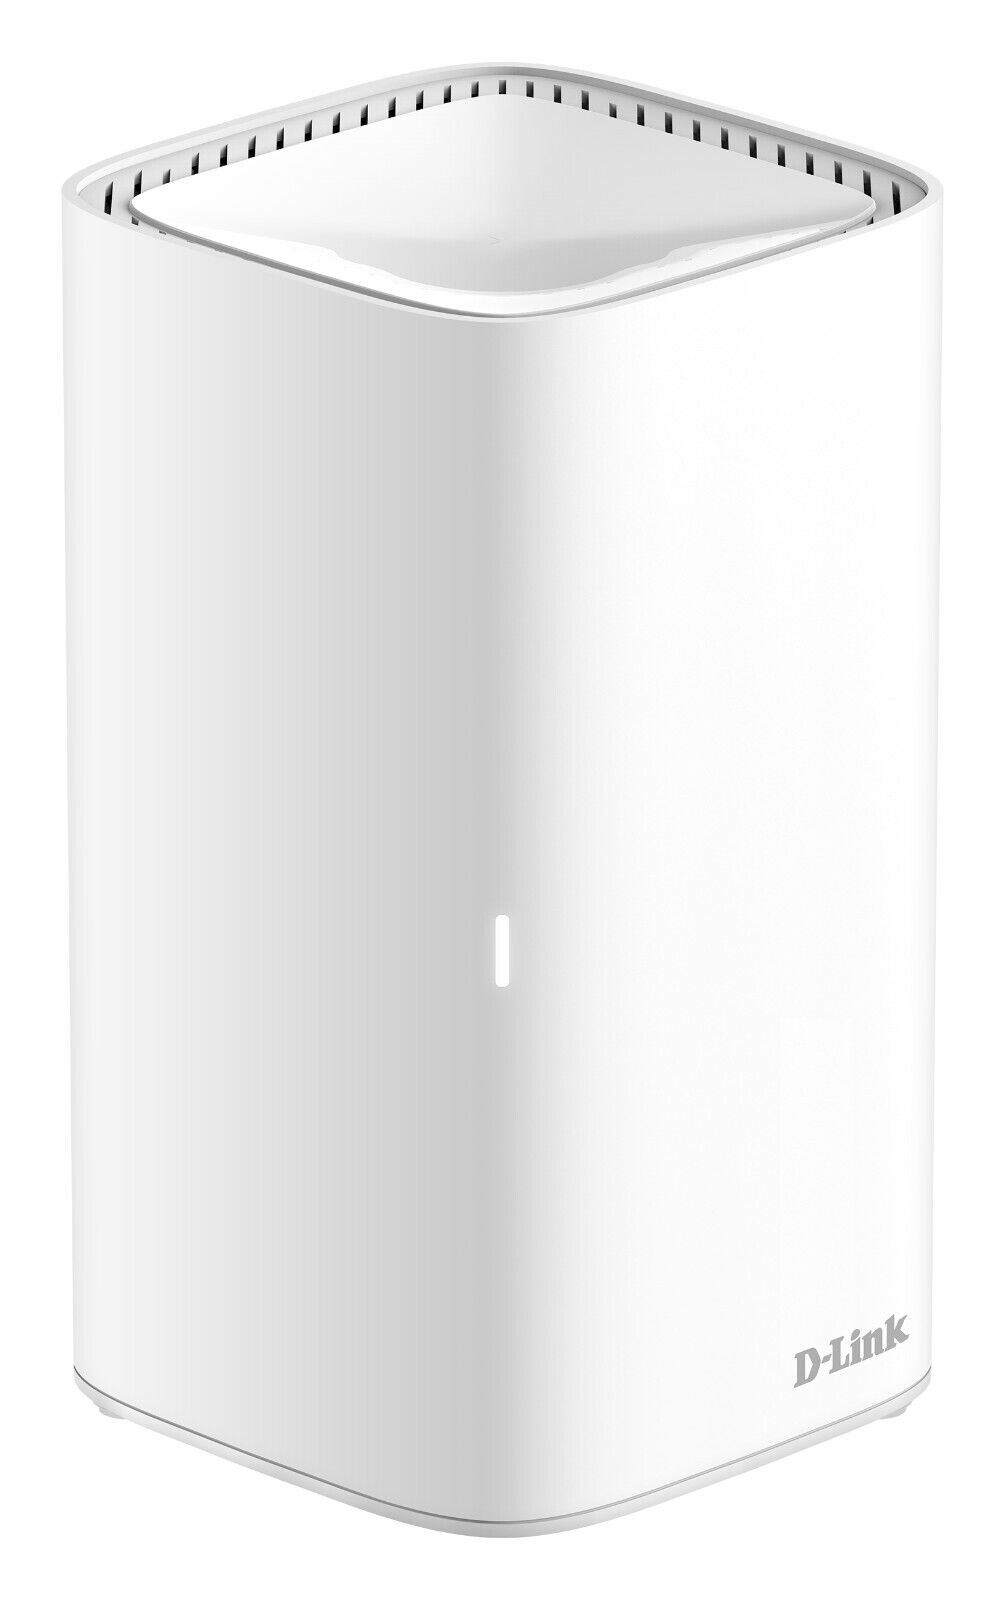 Mesh Wi-fi Router D-Link 4 Gigabit Ports Up to 3000sq. ft coverage.